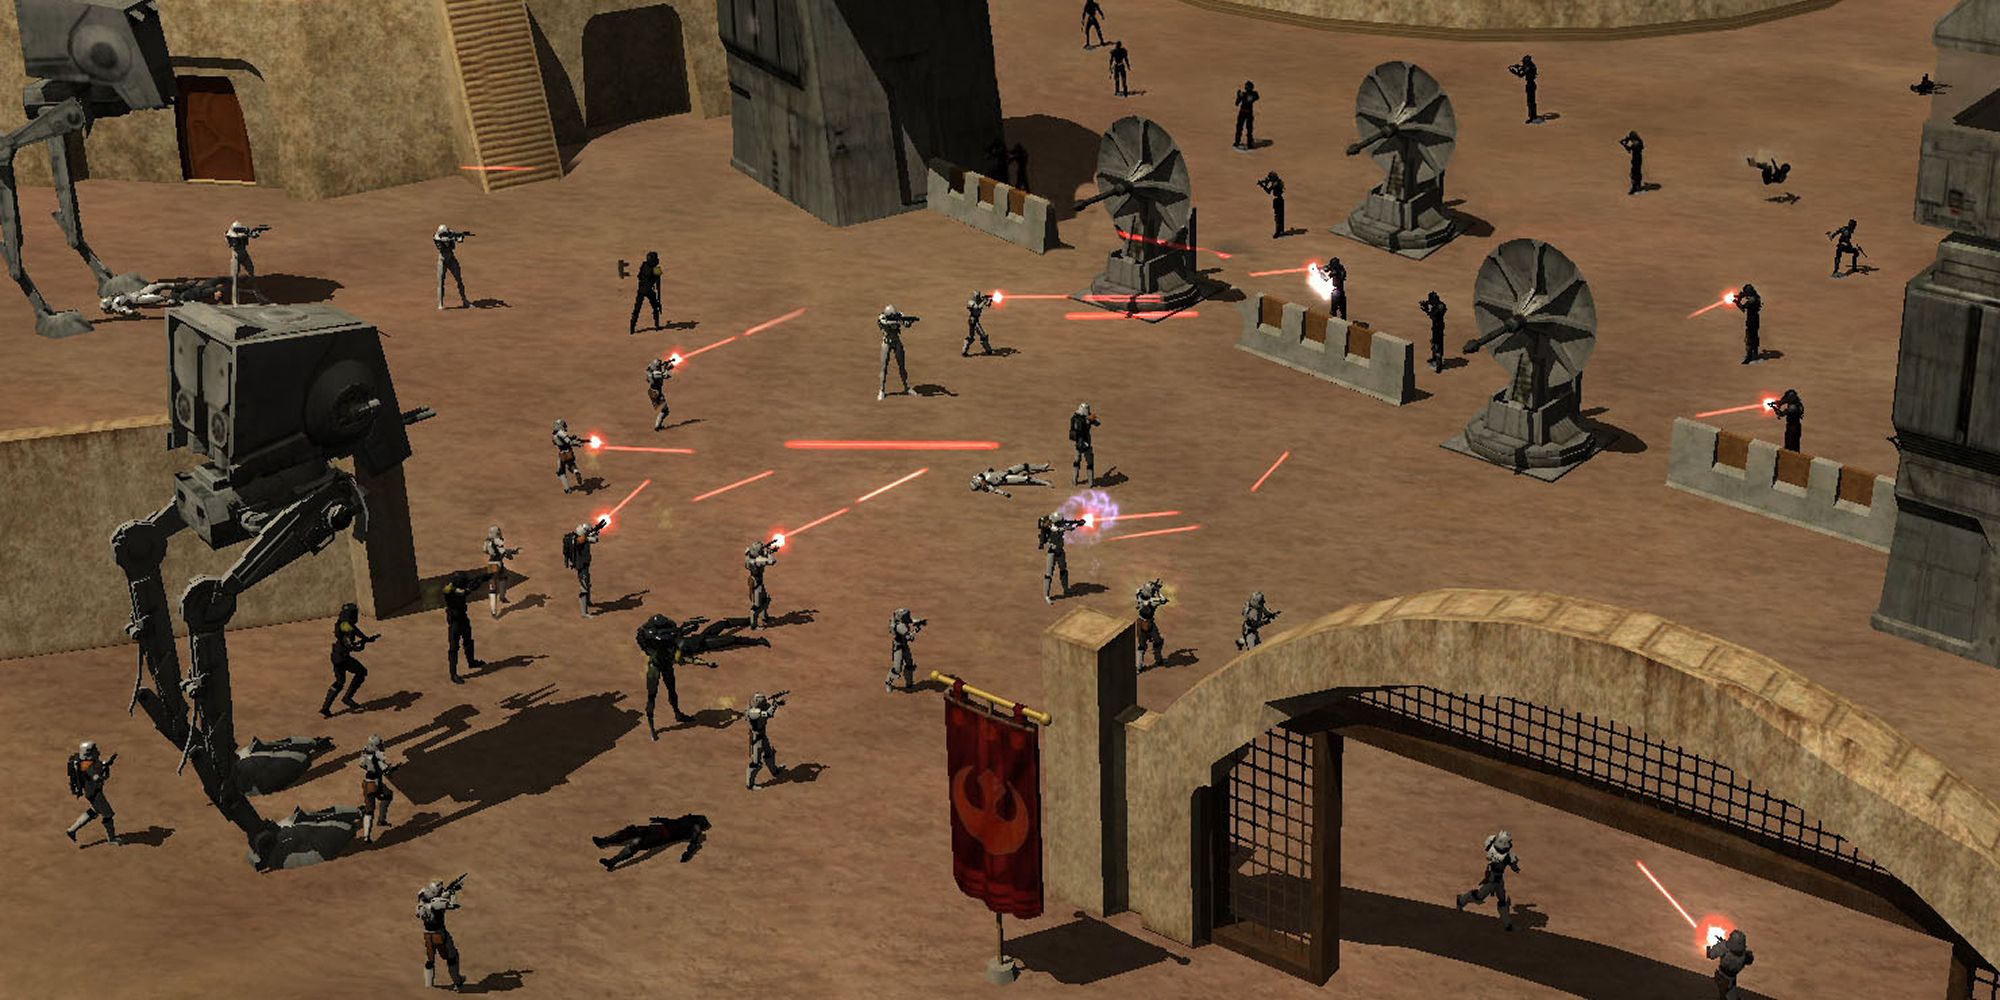 Star Wars Galaxies sprawling battle with Empire and Rebel forces